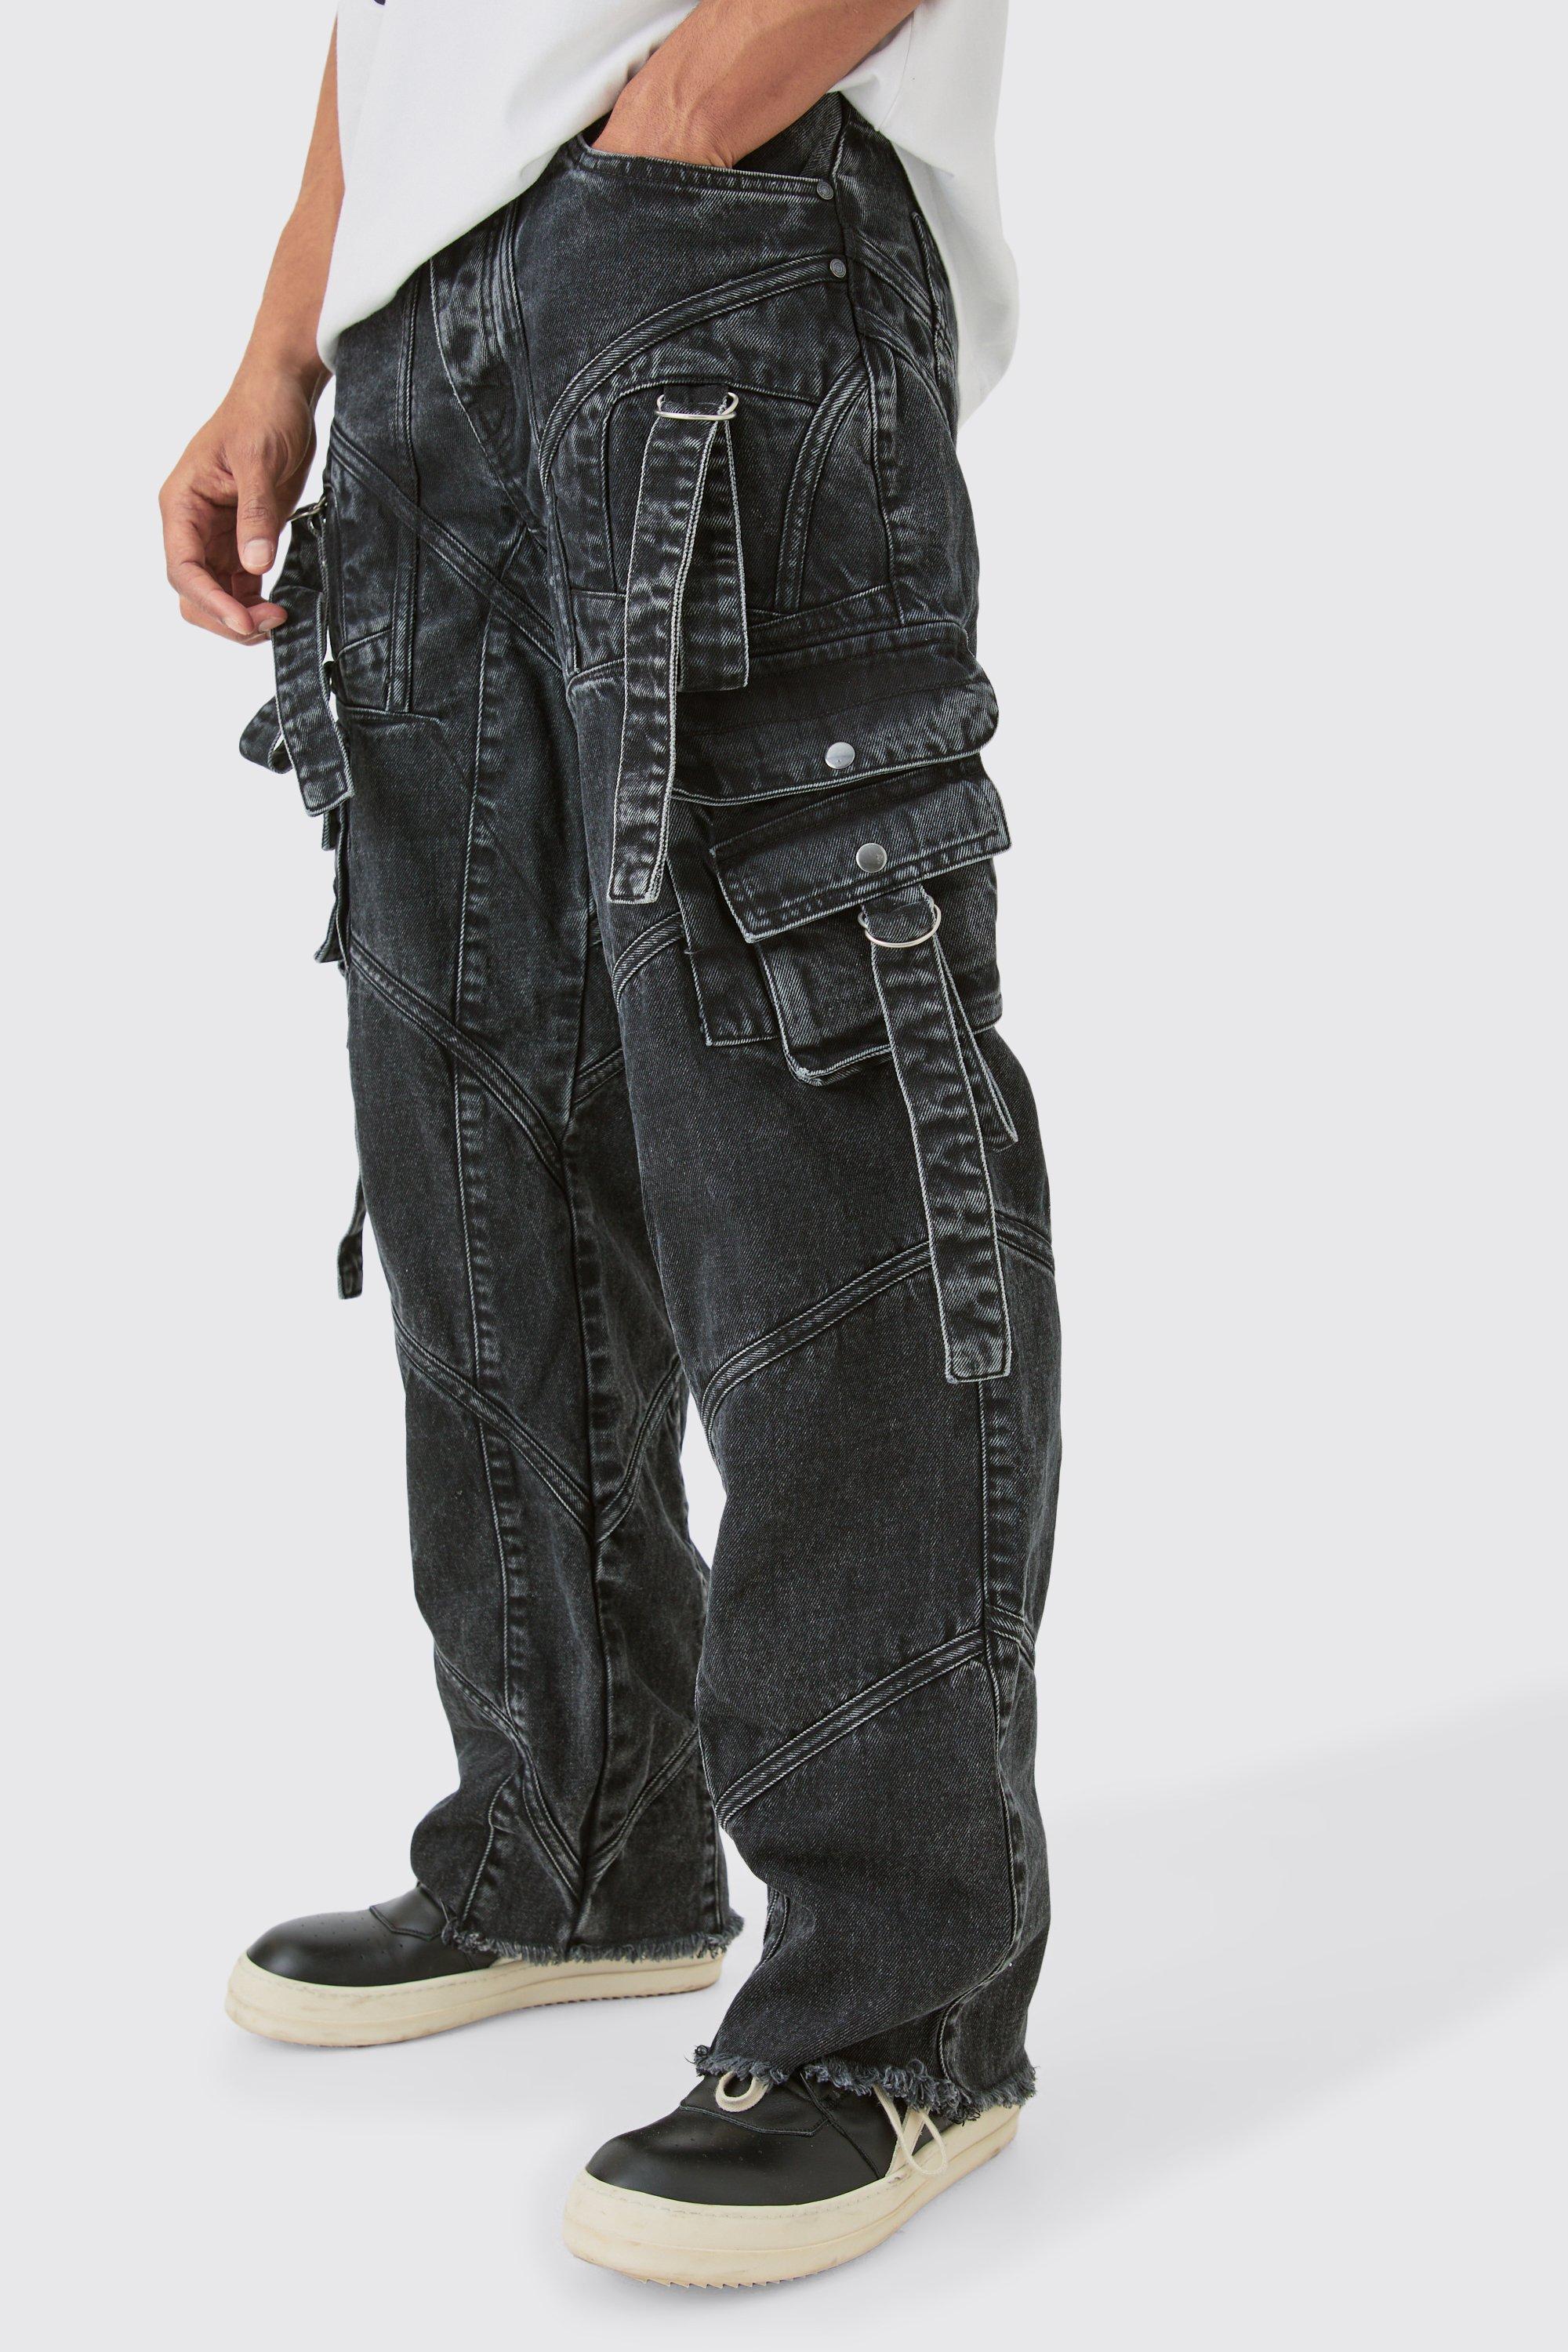 Image of Baggy Rigid Strap And Buckle Detail Jean In Washed Black, Nero